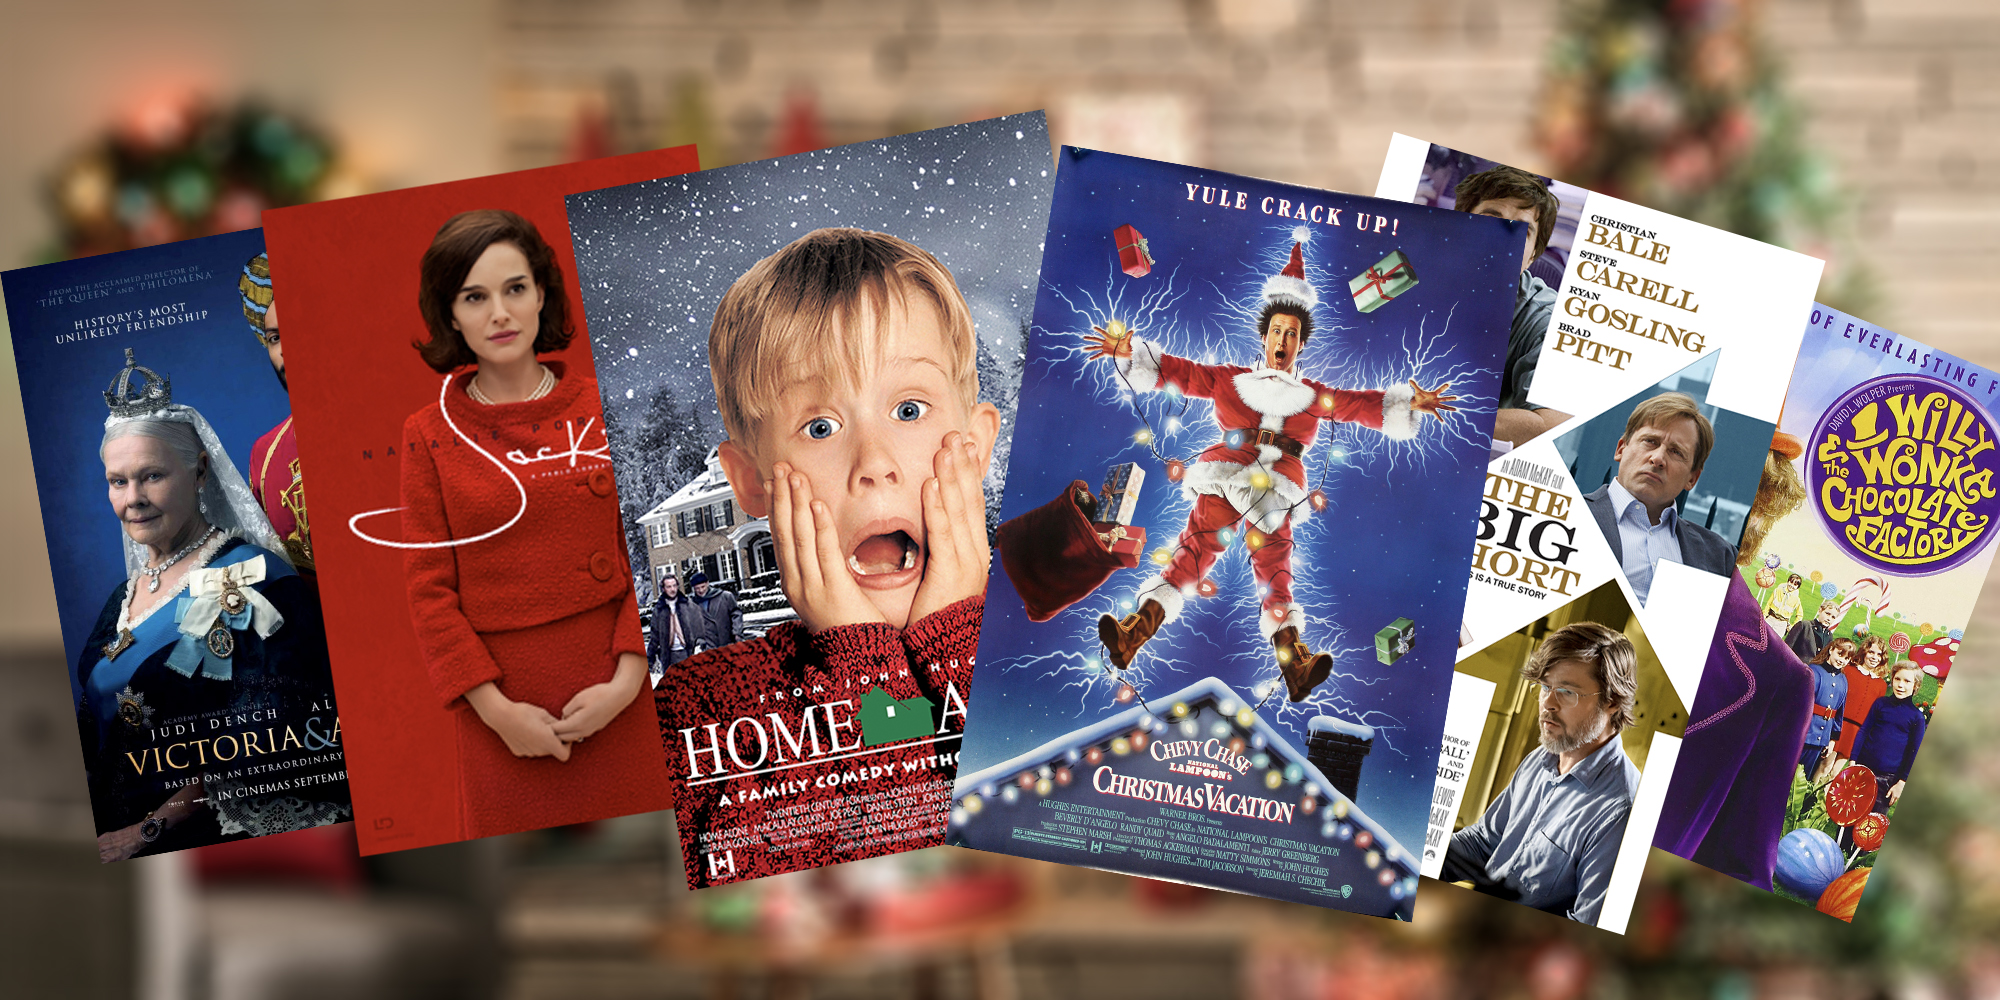 This week's best iTunes movie deals: Home Alone, Christmas Vacation, 4K from $5, more - 9to5Toys